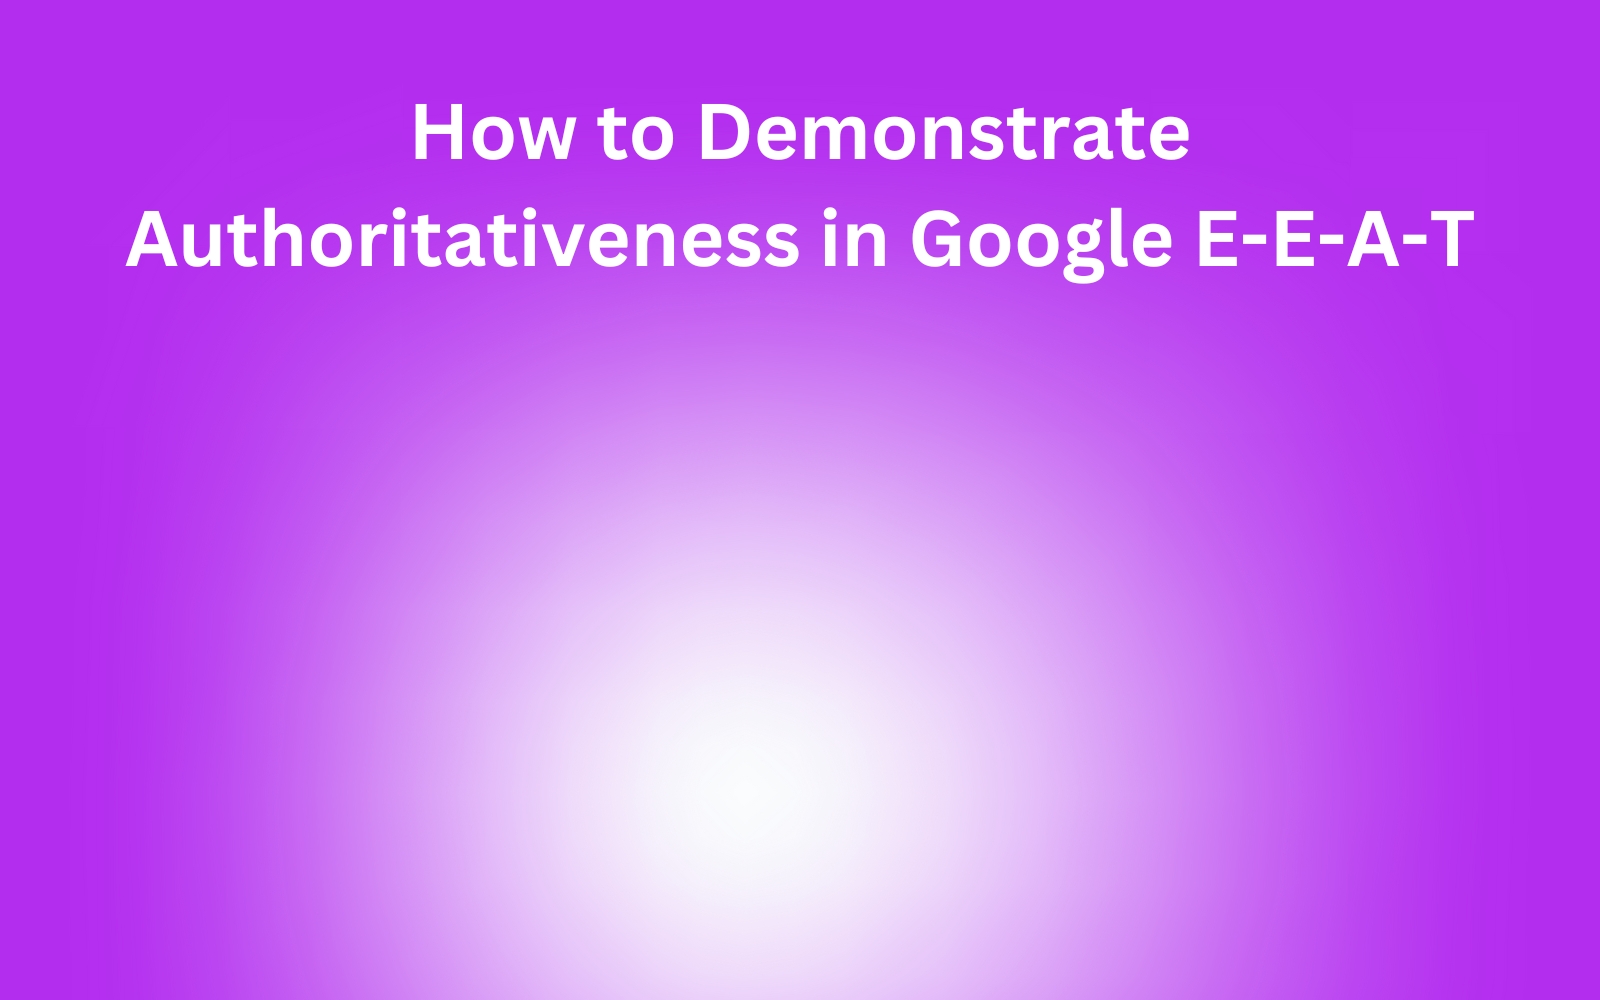 How to Demonstrate Authoritativeness in Google E-E-A-T